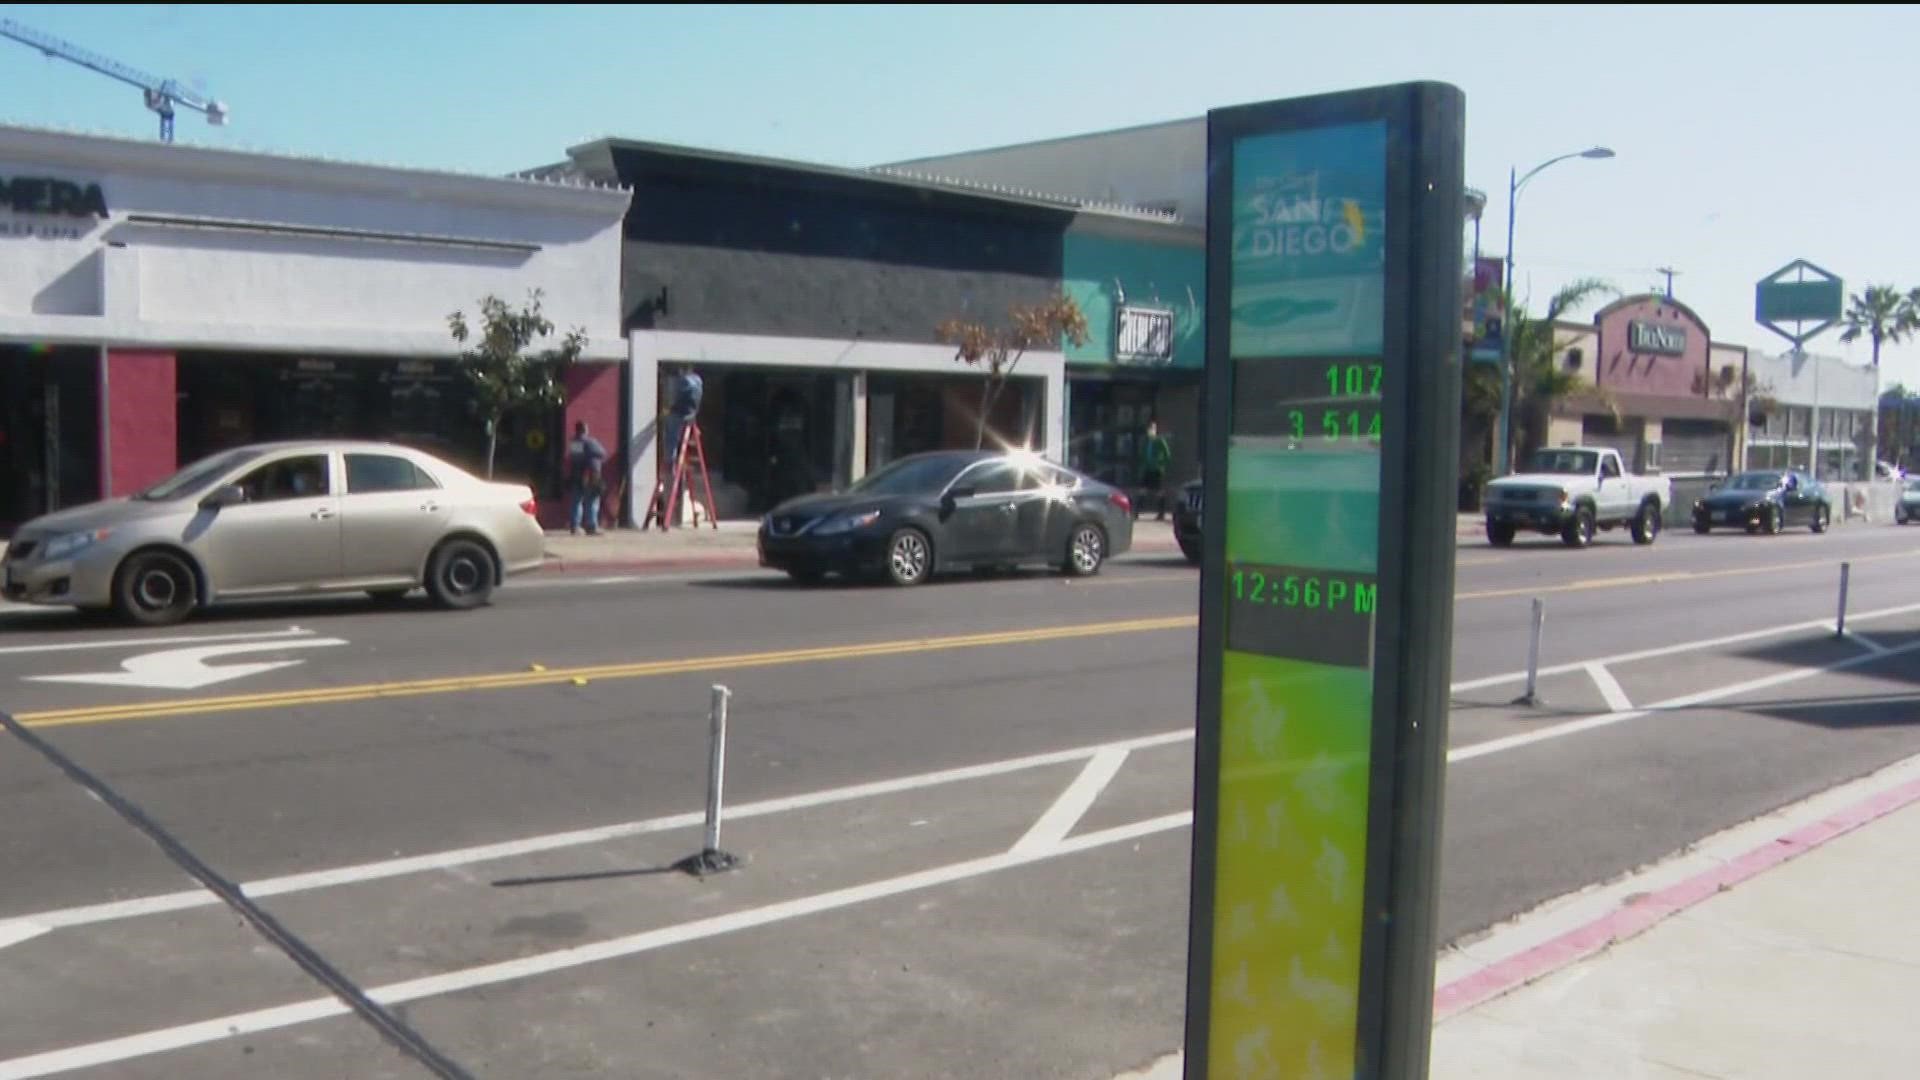 CBS 8 witnesses several double-counts, counting of vehicles and not counting cyclists.